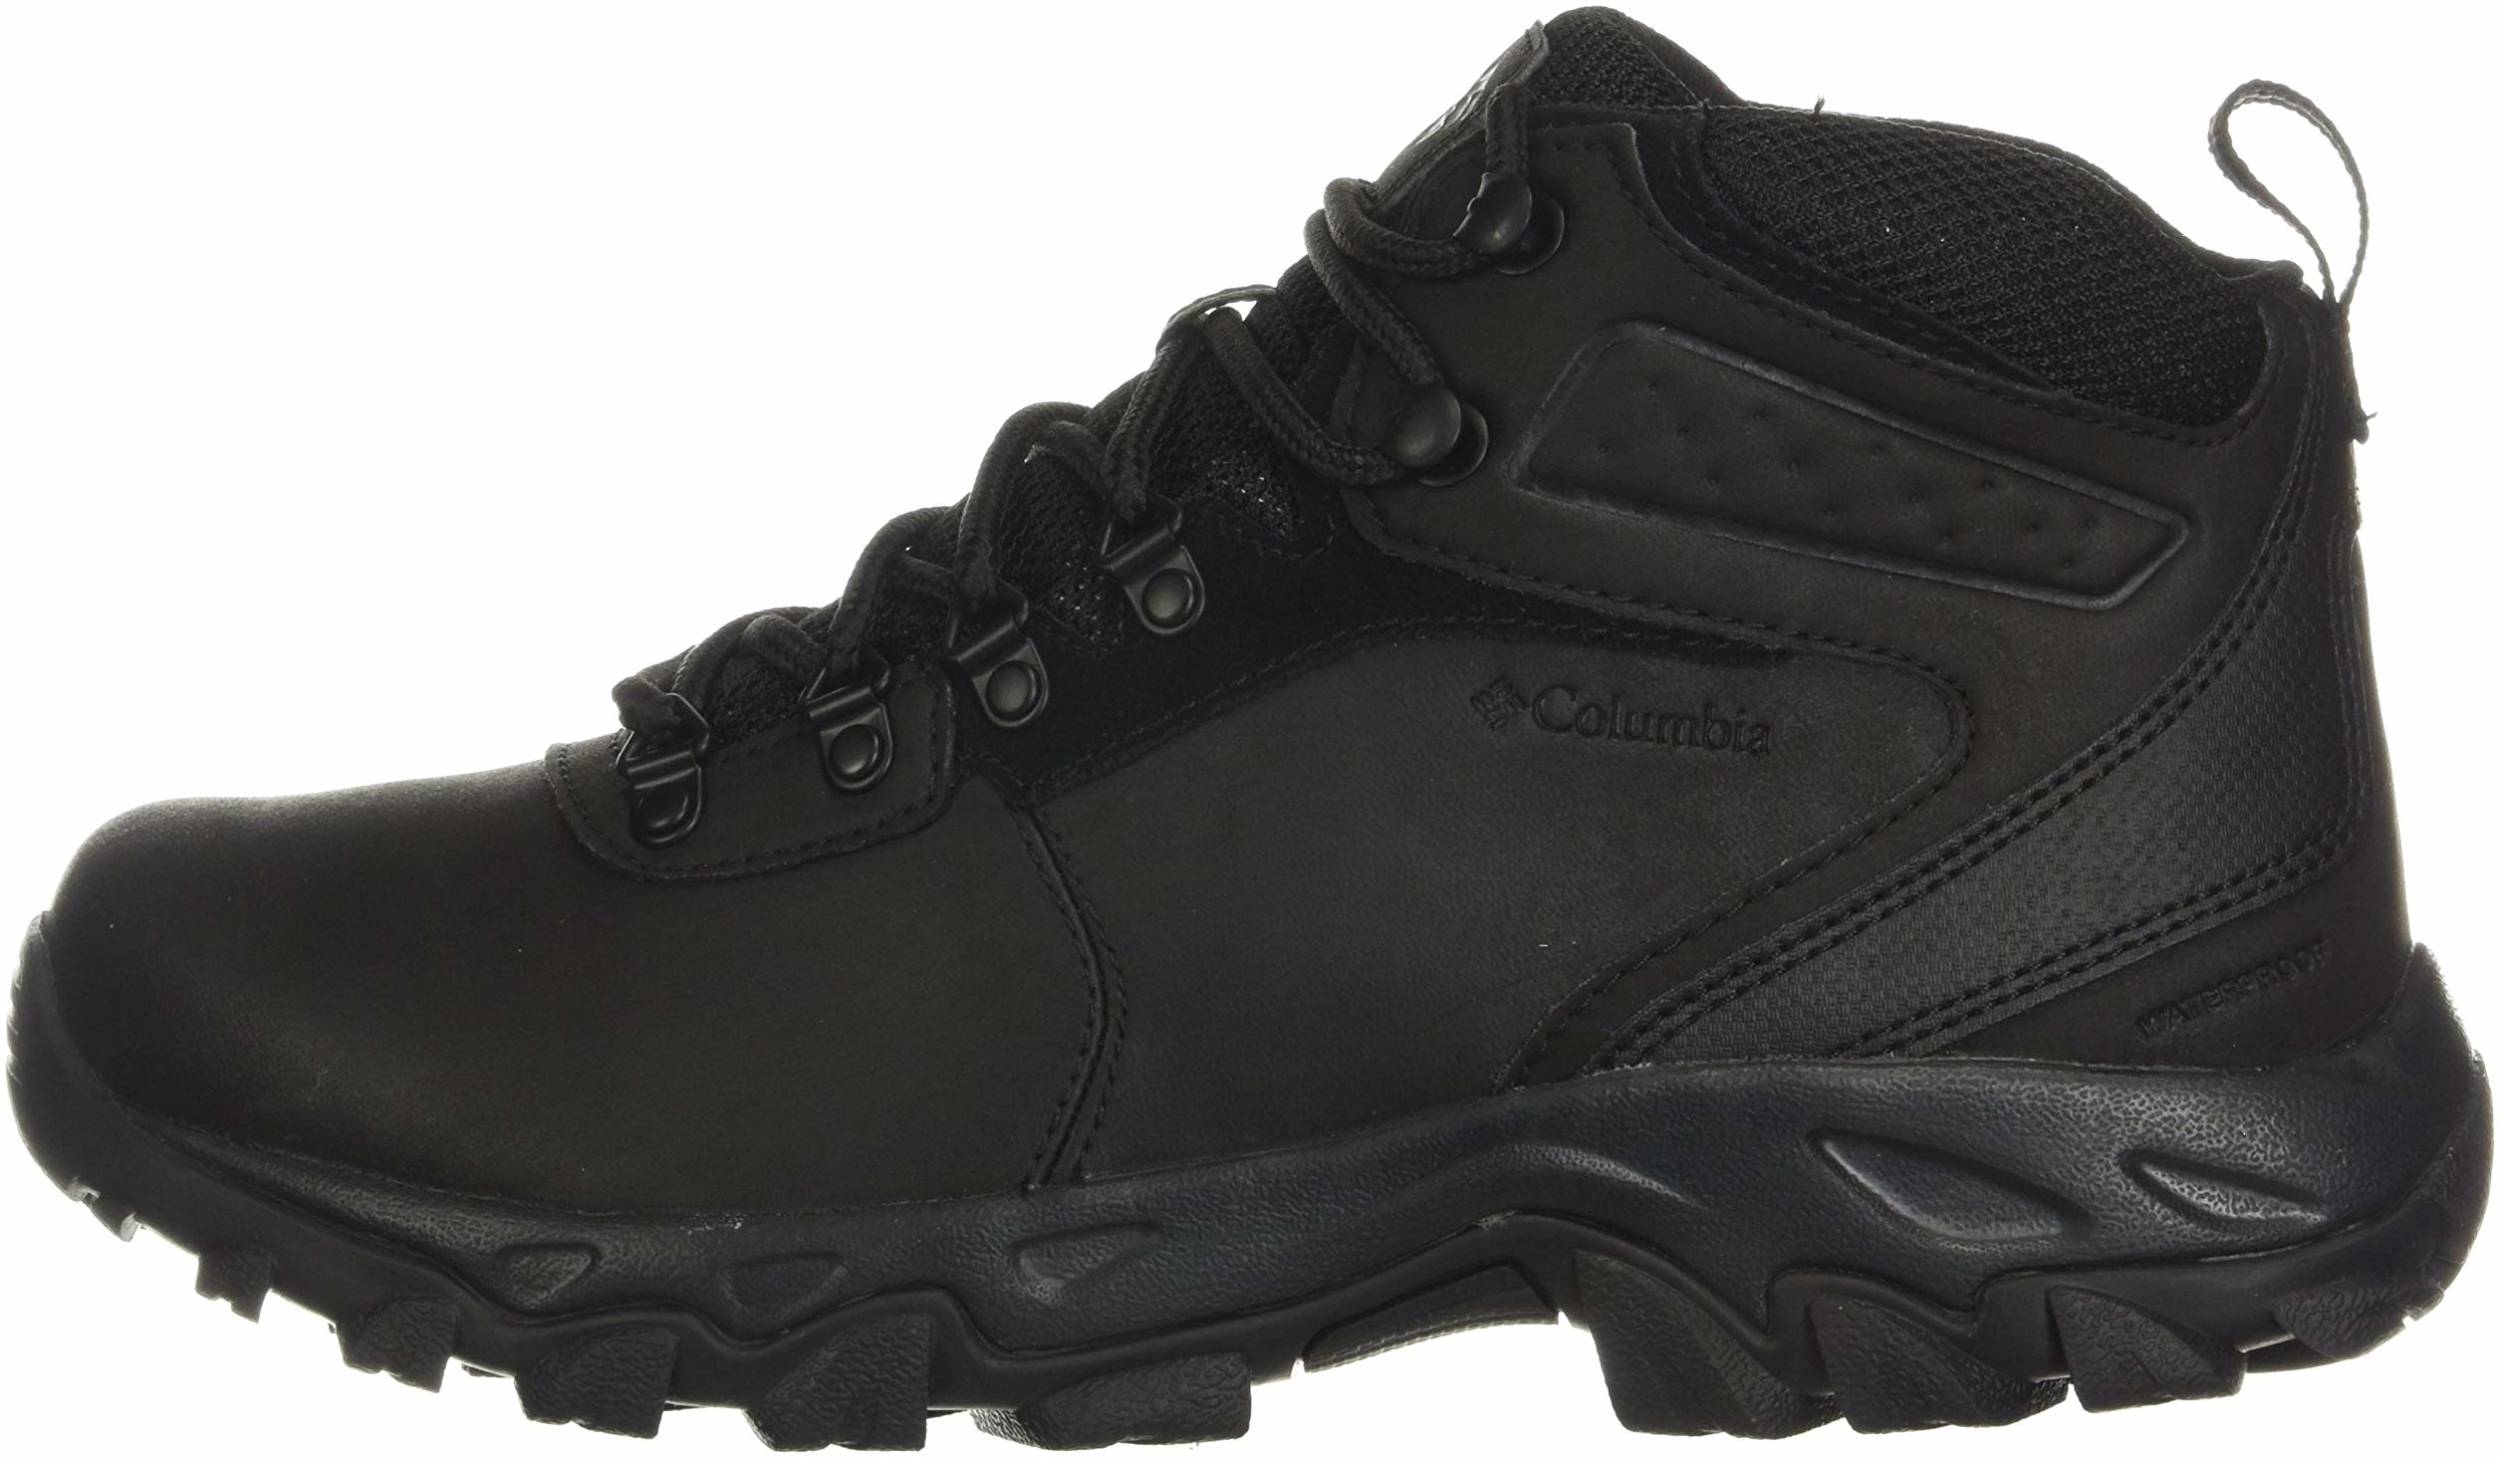 Save 32% on Cheap Hiking Boots (54 